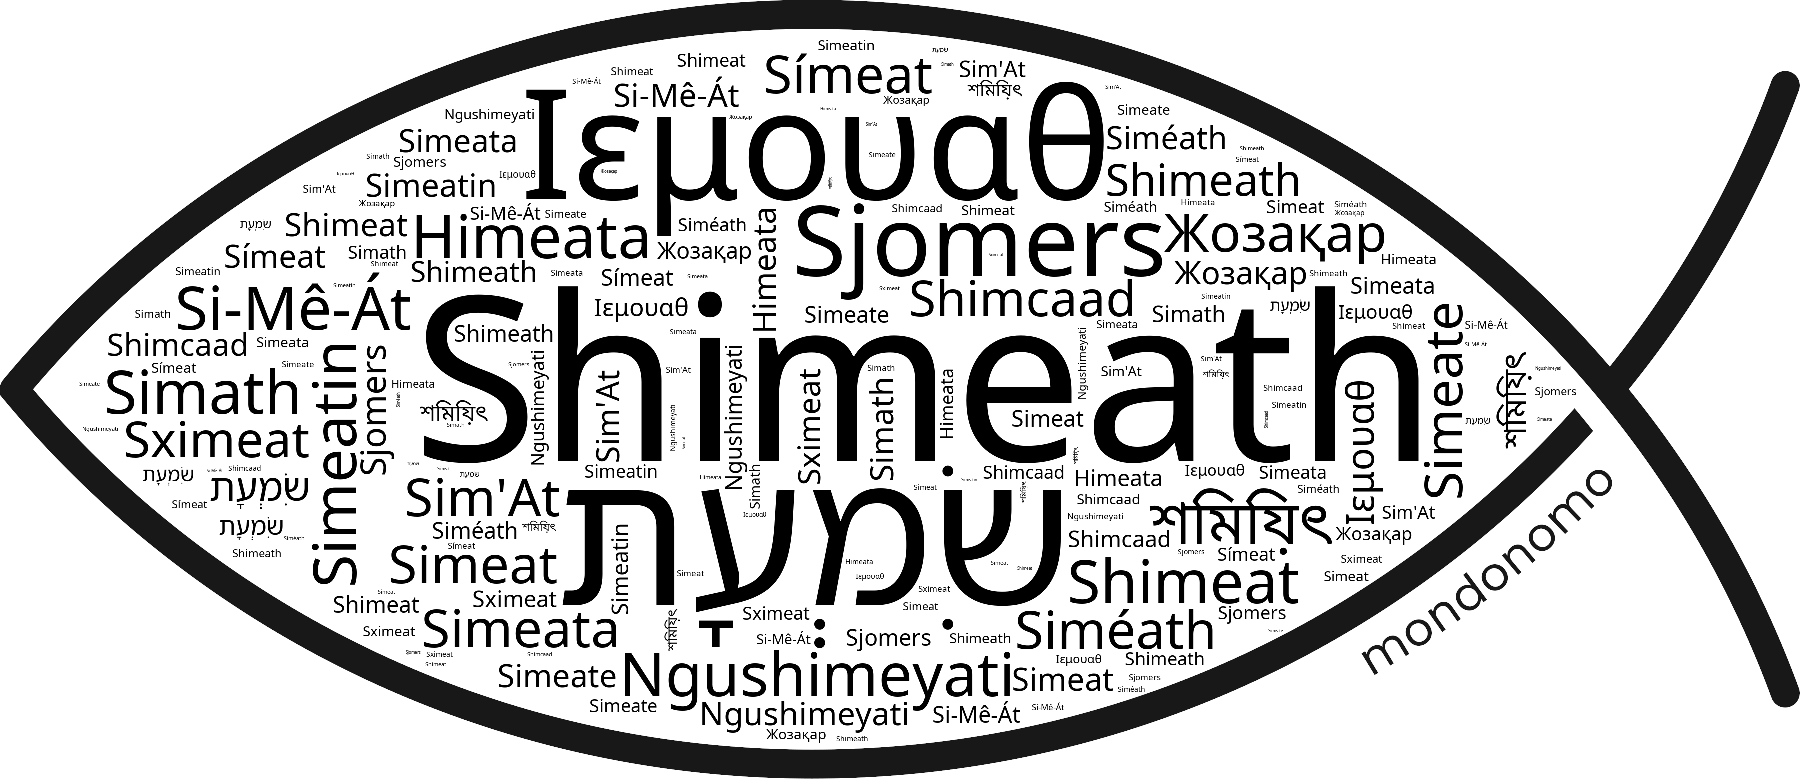 Name Shimeath in the world's Bibles